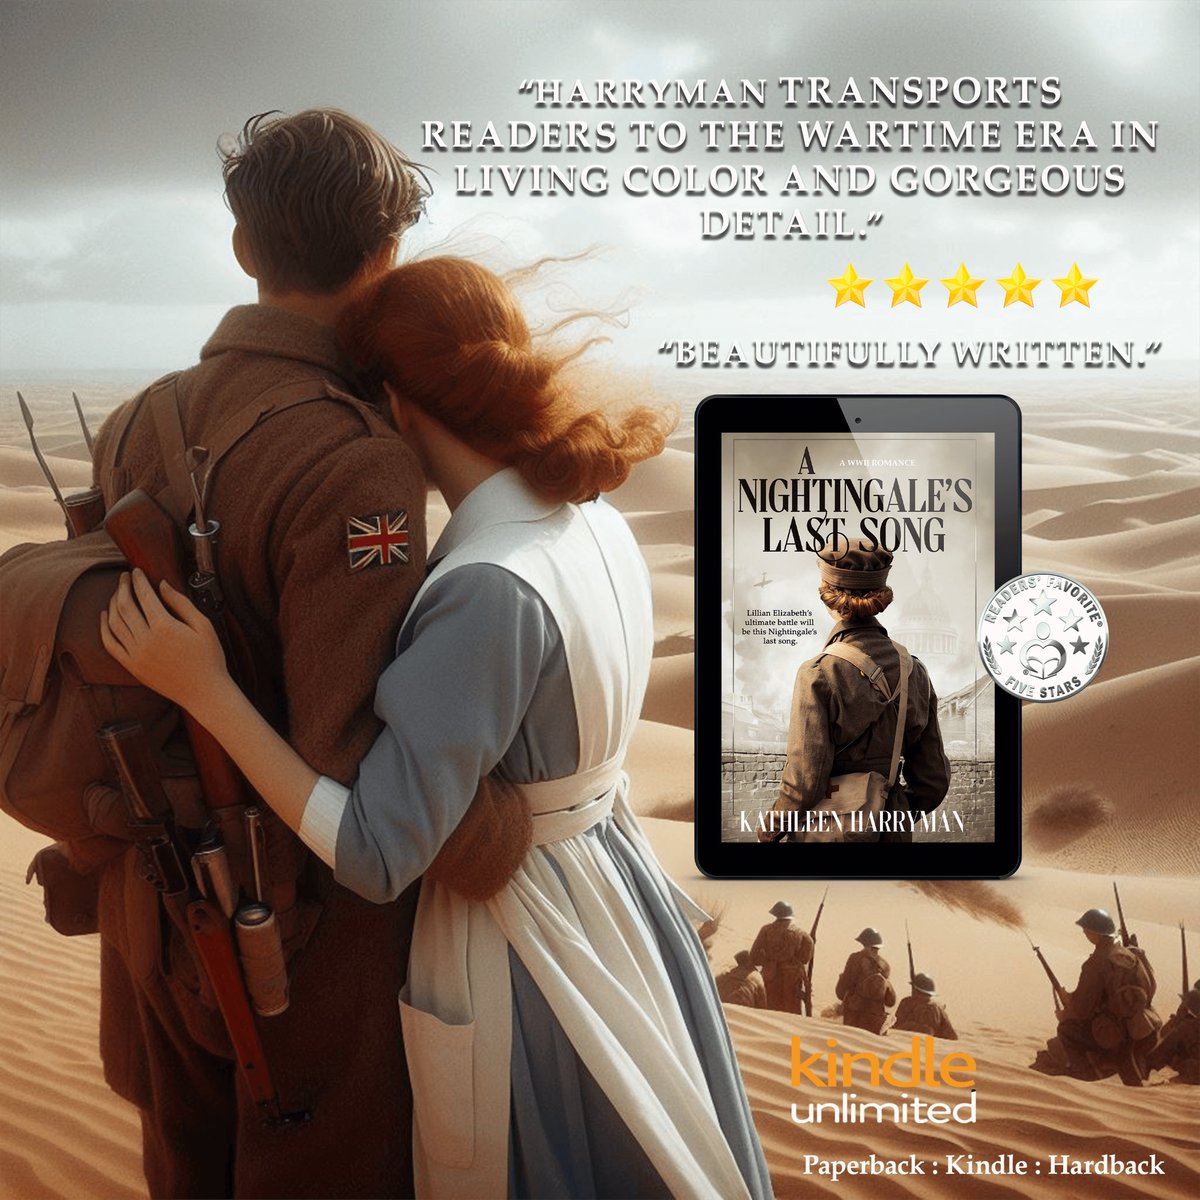 #BookReview 'Lilly's struggle with love, torn between Major Joseph Lawrence and Sergeant Alick McNavis, offers an enthralling romantic tale that’s sure to sweep you off your feet.' #KU #Kindle #Paperback #Hardback mybook.to/Nightingales #HistoricalFiction #HistFic #IARTG #WW2